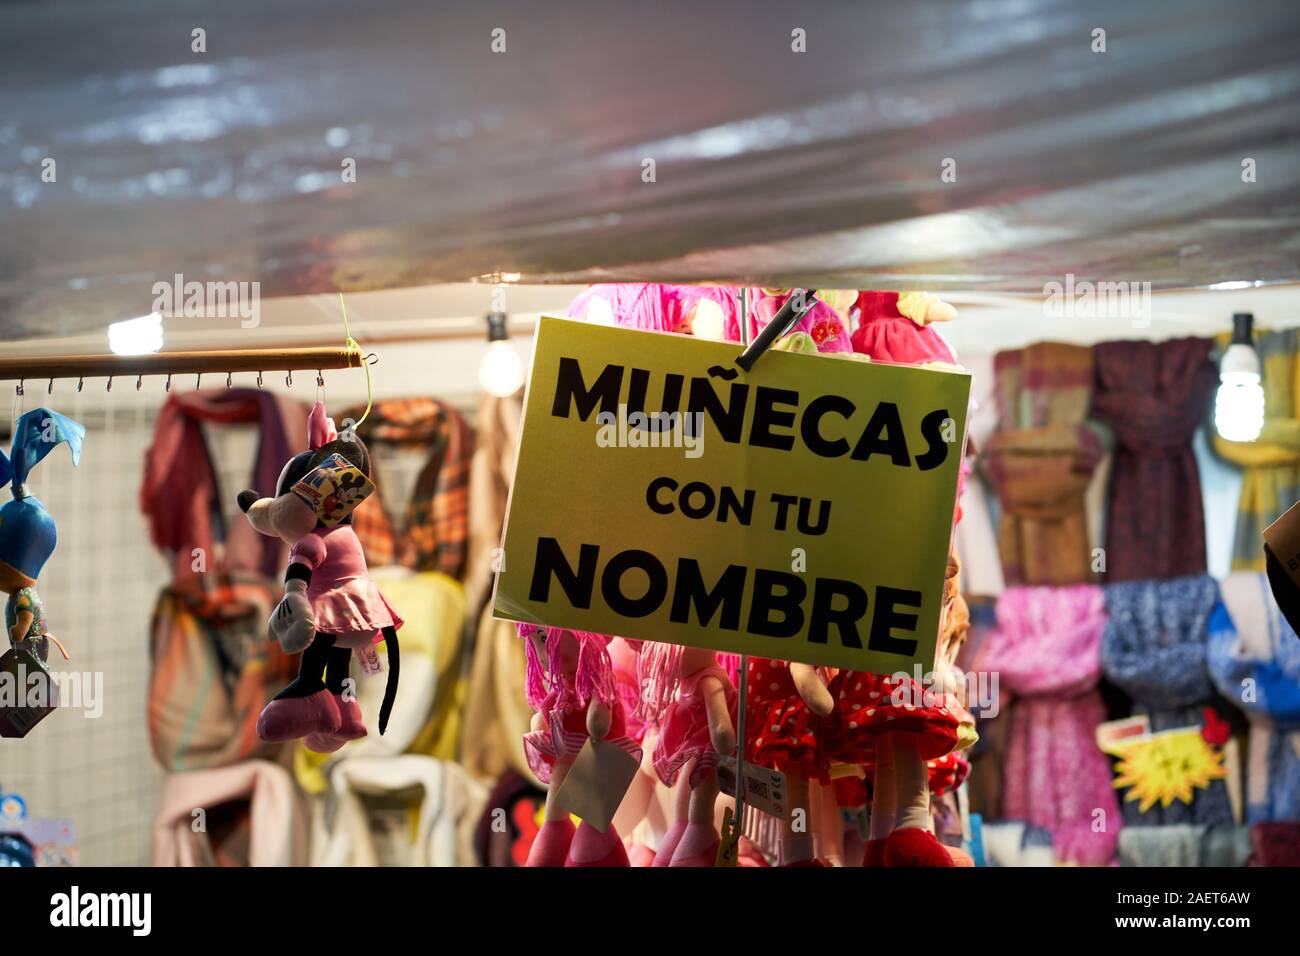 A sign showing puppets for sale with your name in Spanish Stock Photo